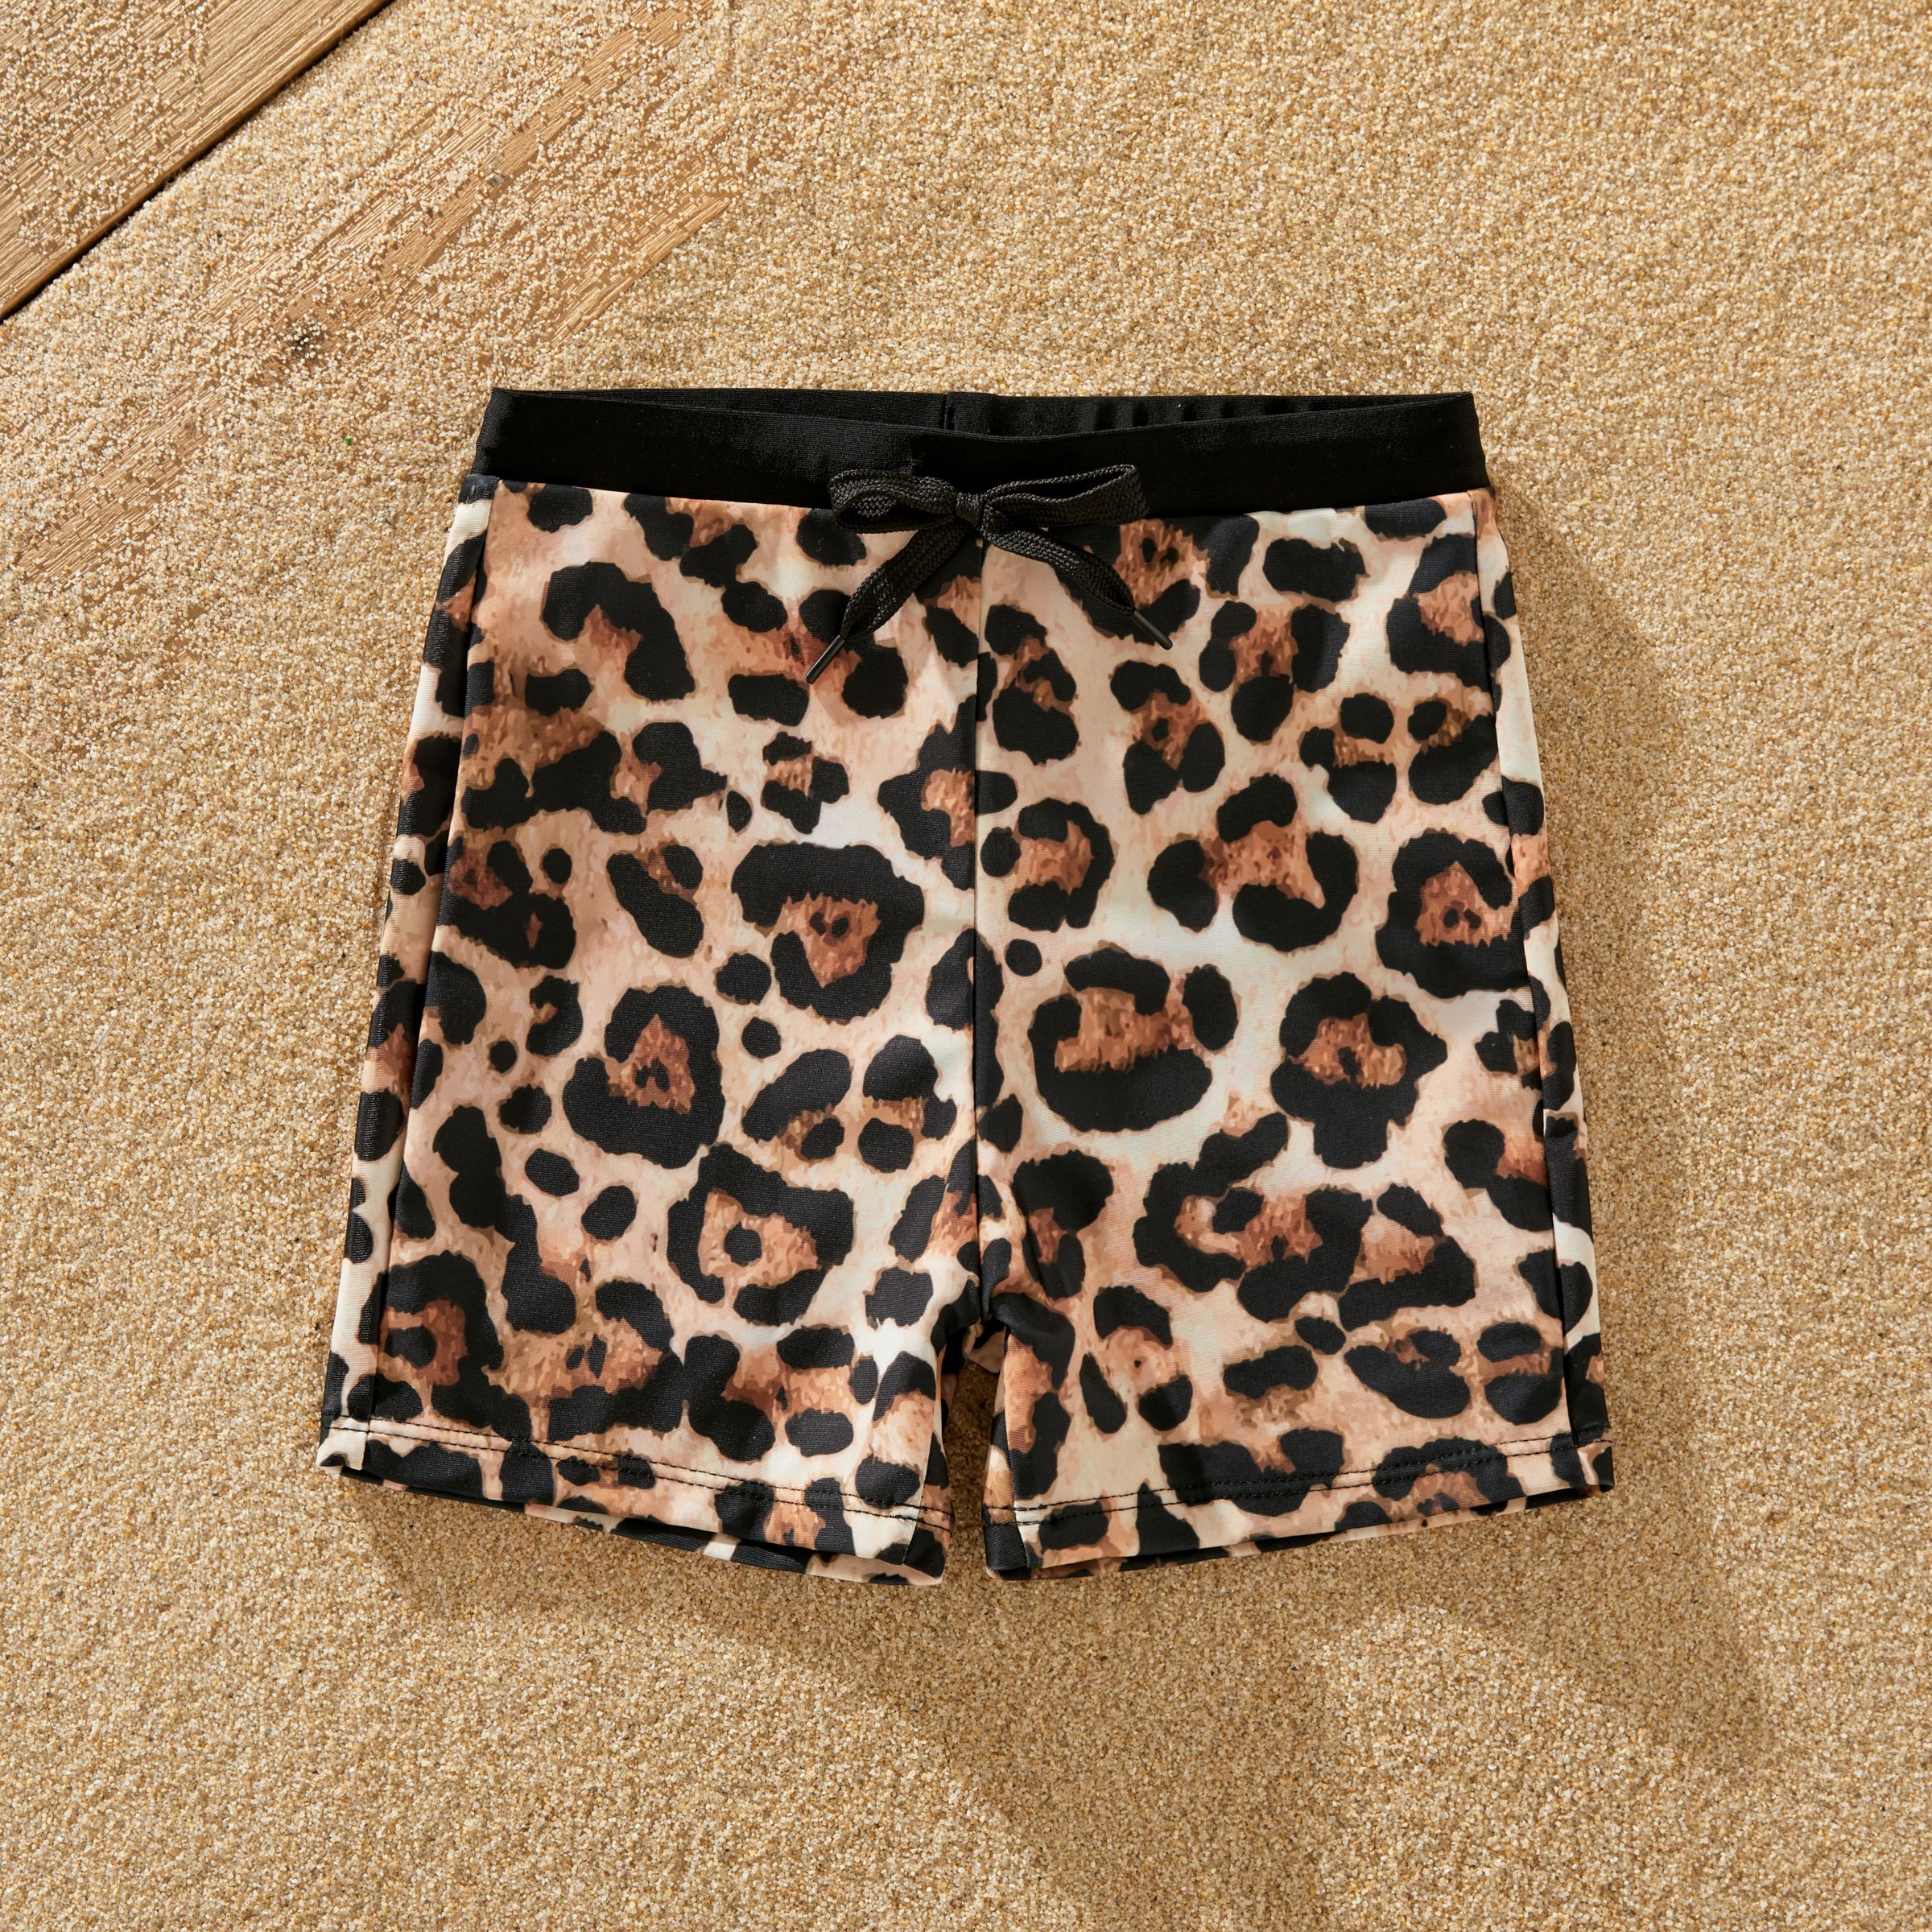 Family Matching Leopard Printed Swim Trunks or One-Piece Cross Back Splicing Swimsuit